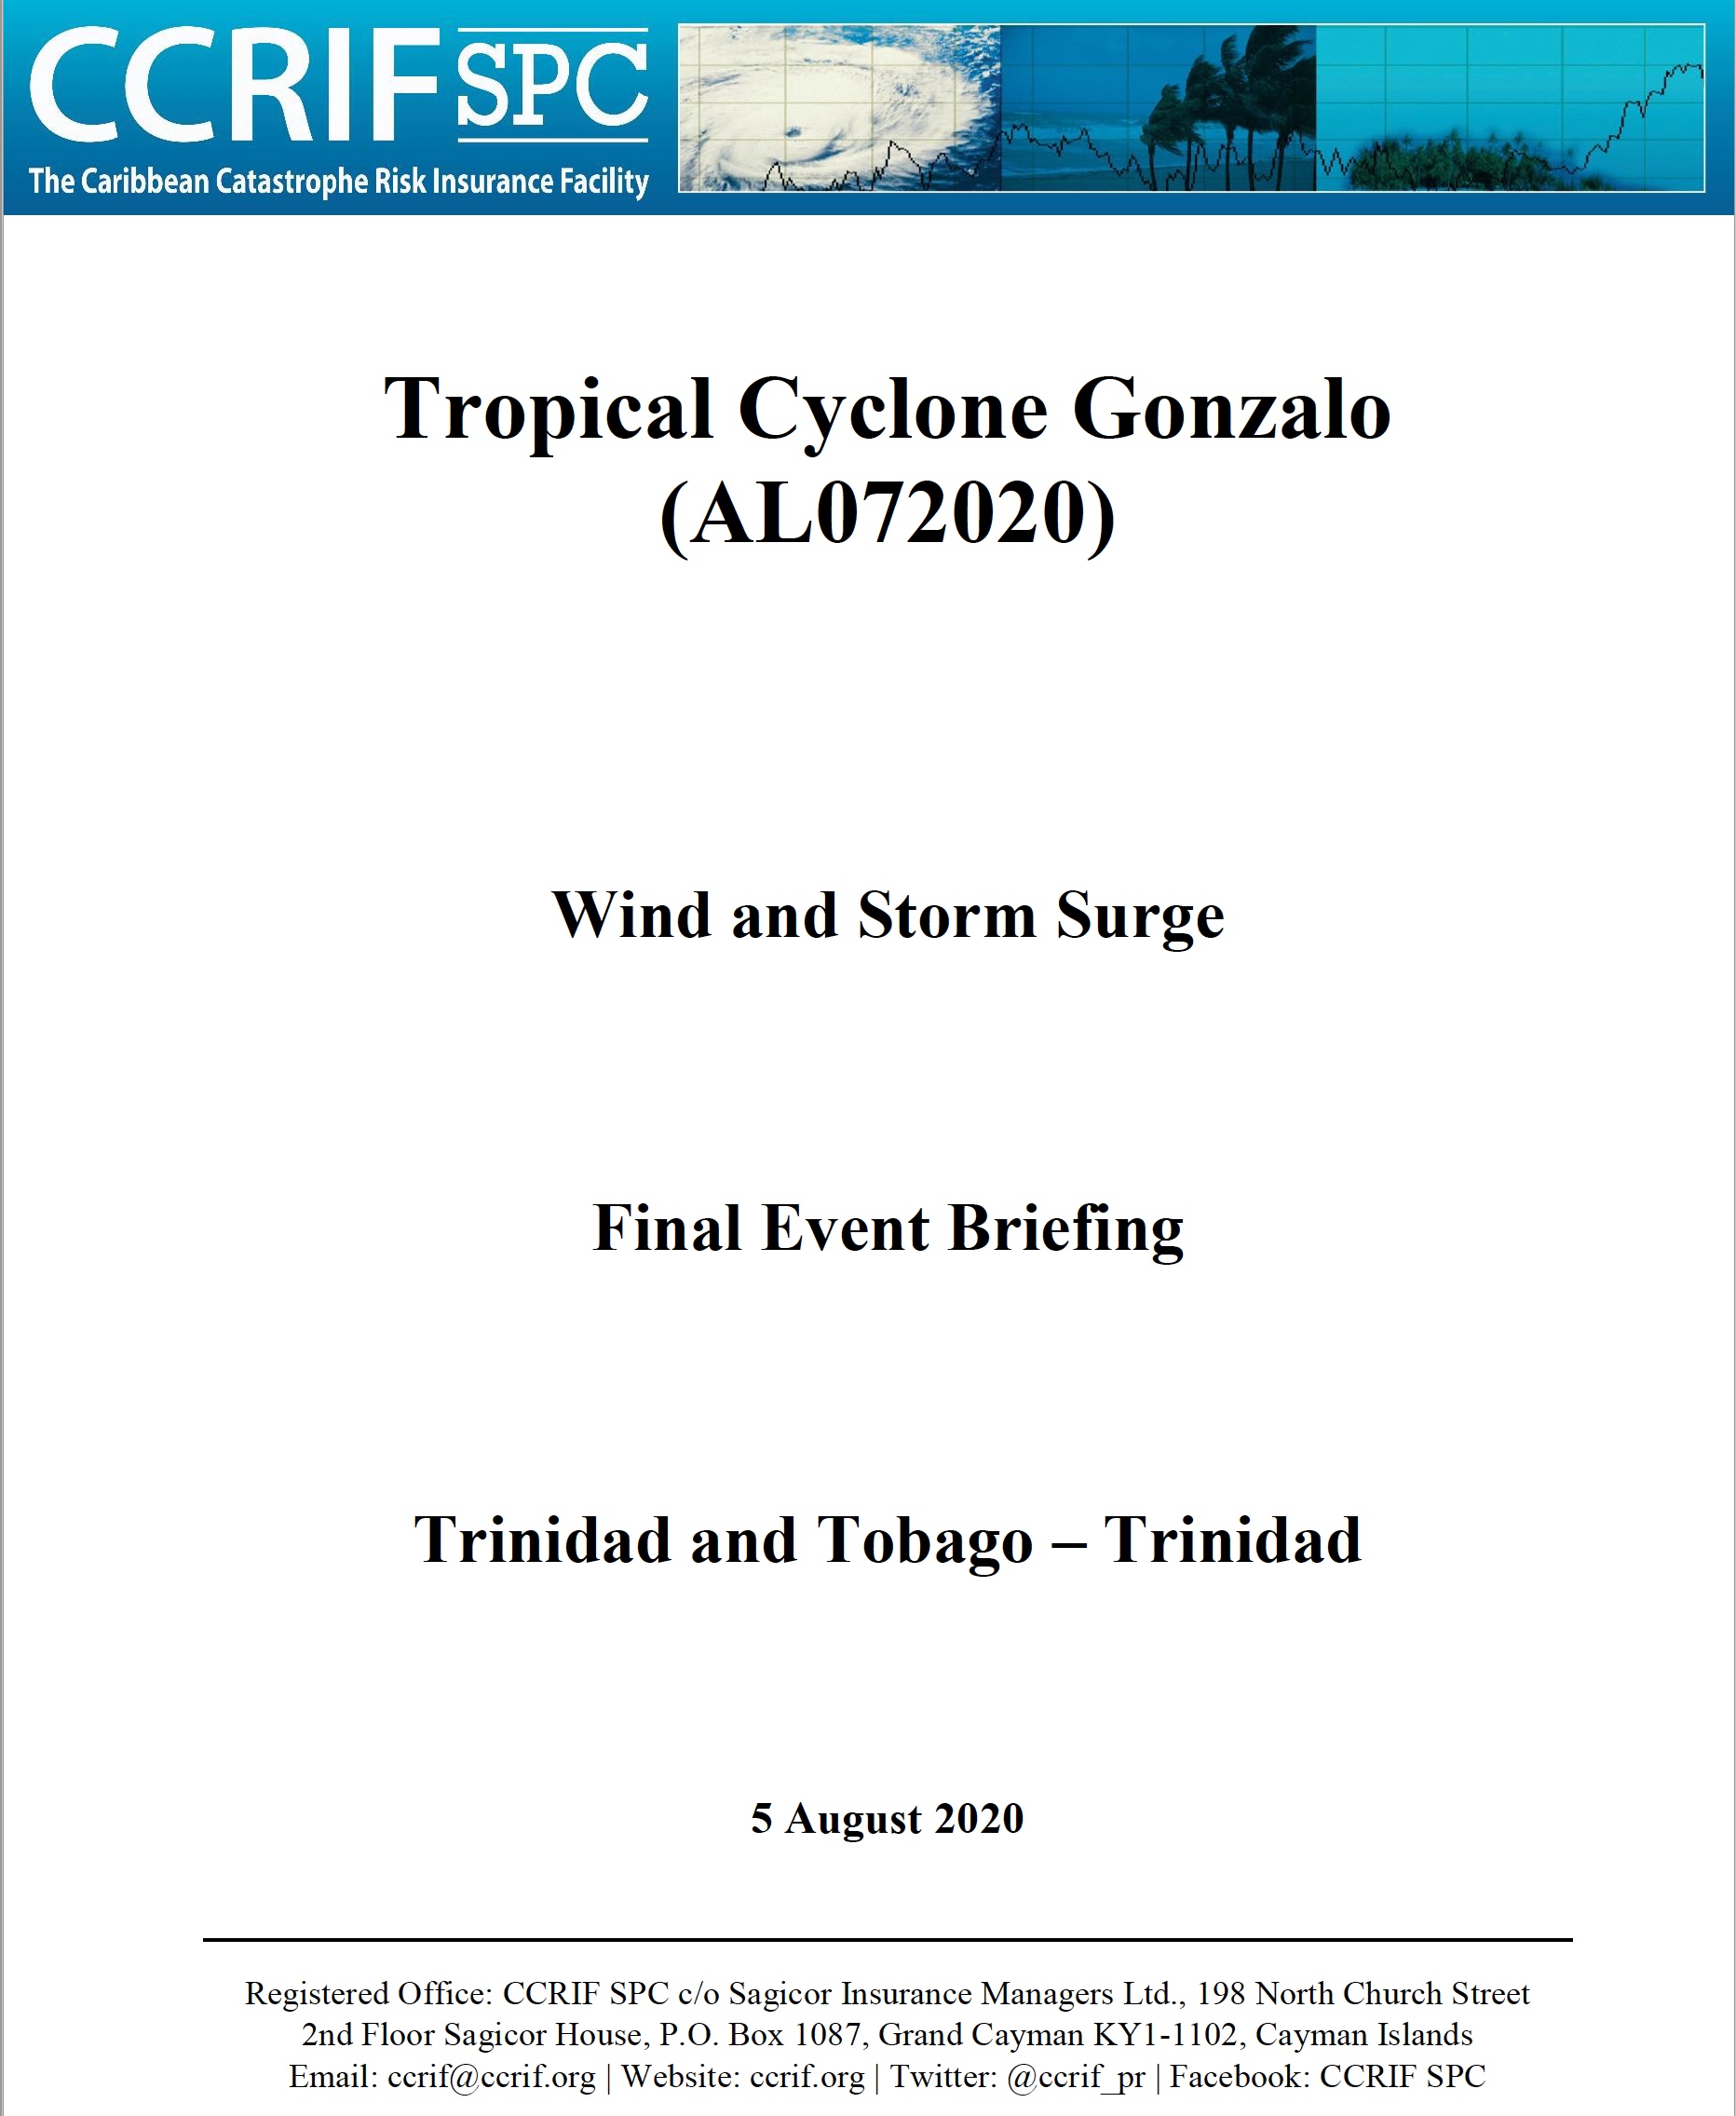 Event Briefing - TC Gonzalo - Wind and Storm Surge - Trinidad and Tobago - August 5 2020